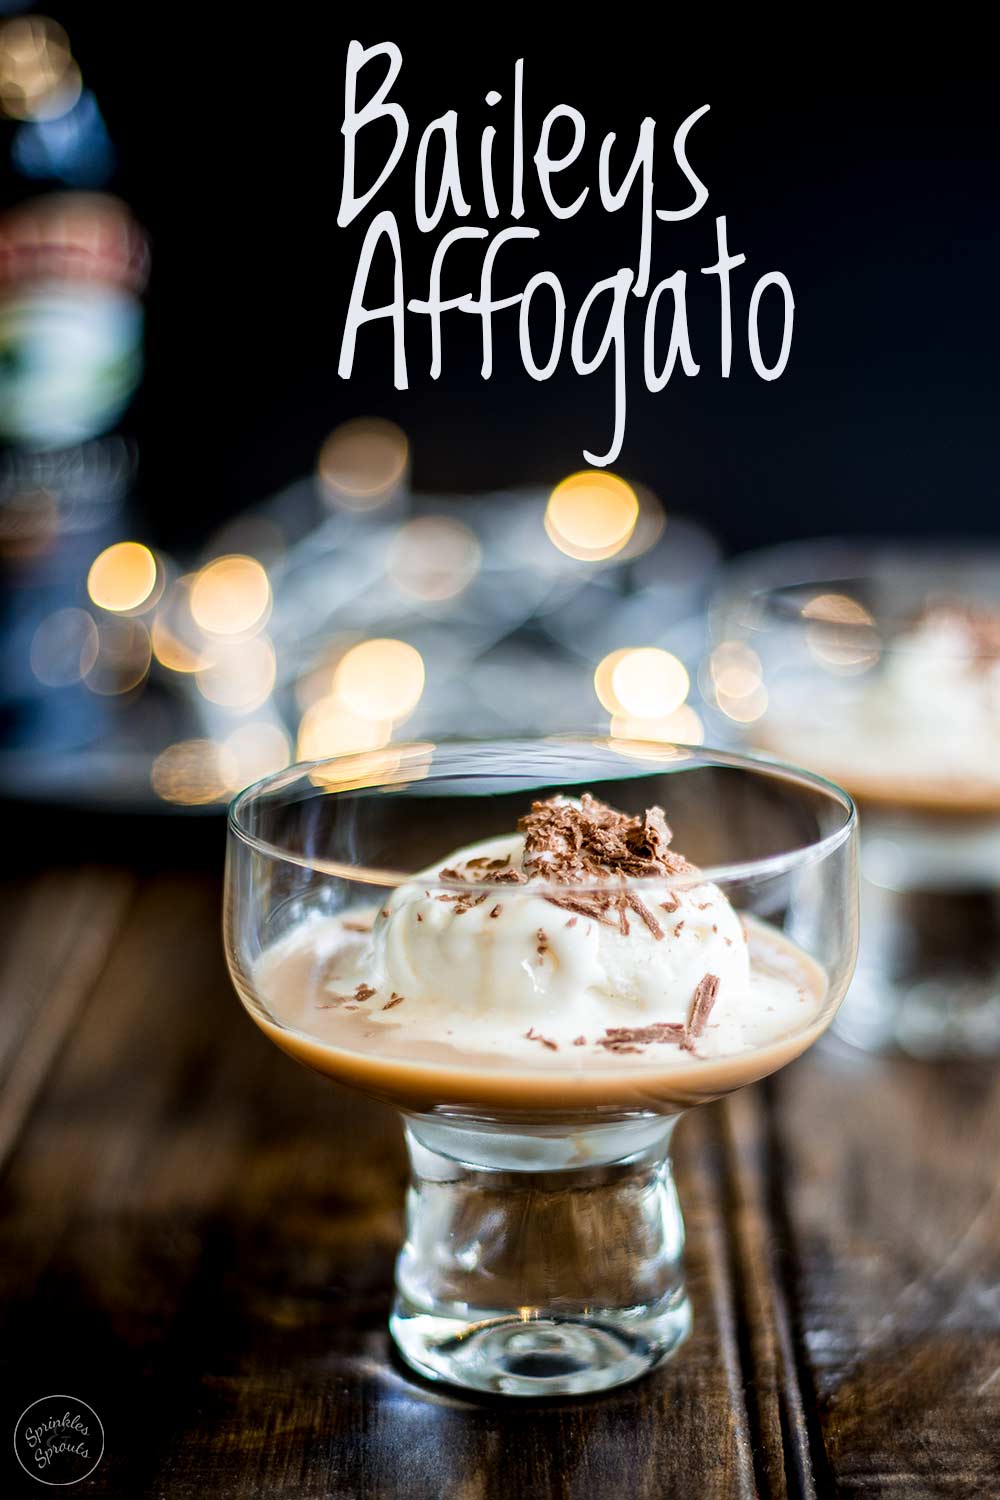 Two classes of baileys Affogato with fairy lights in the background and text at the top